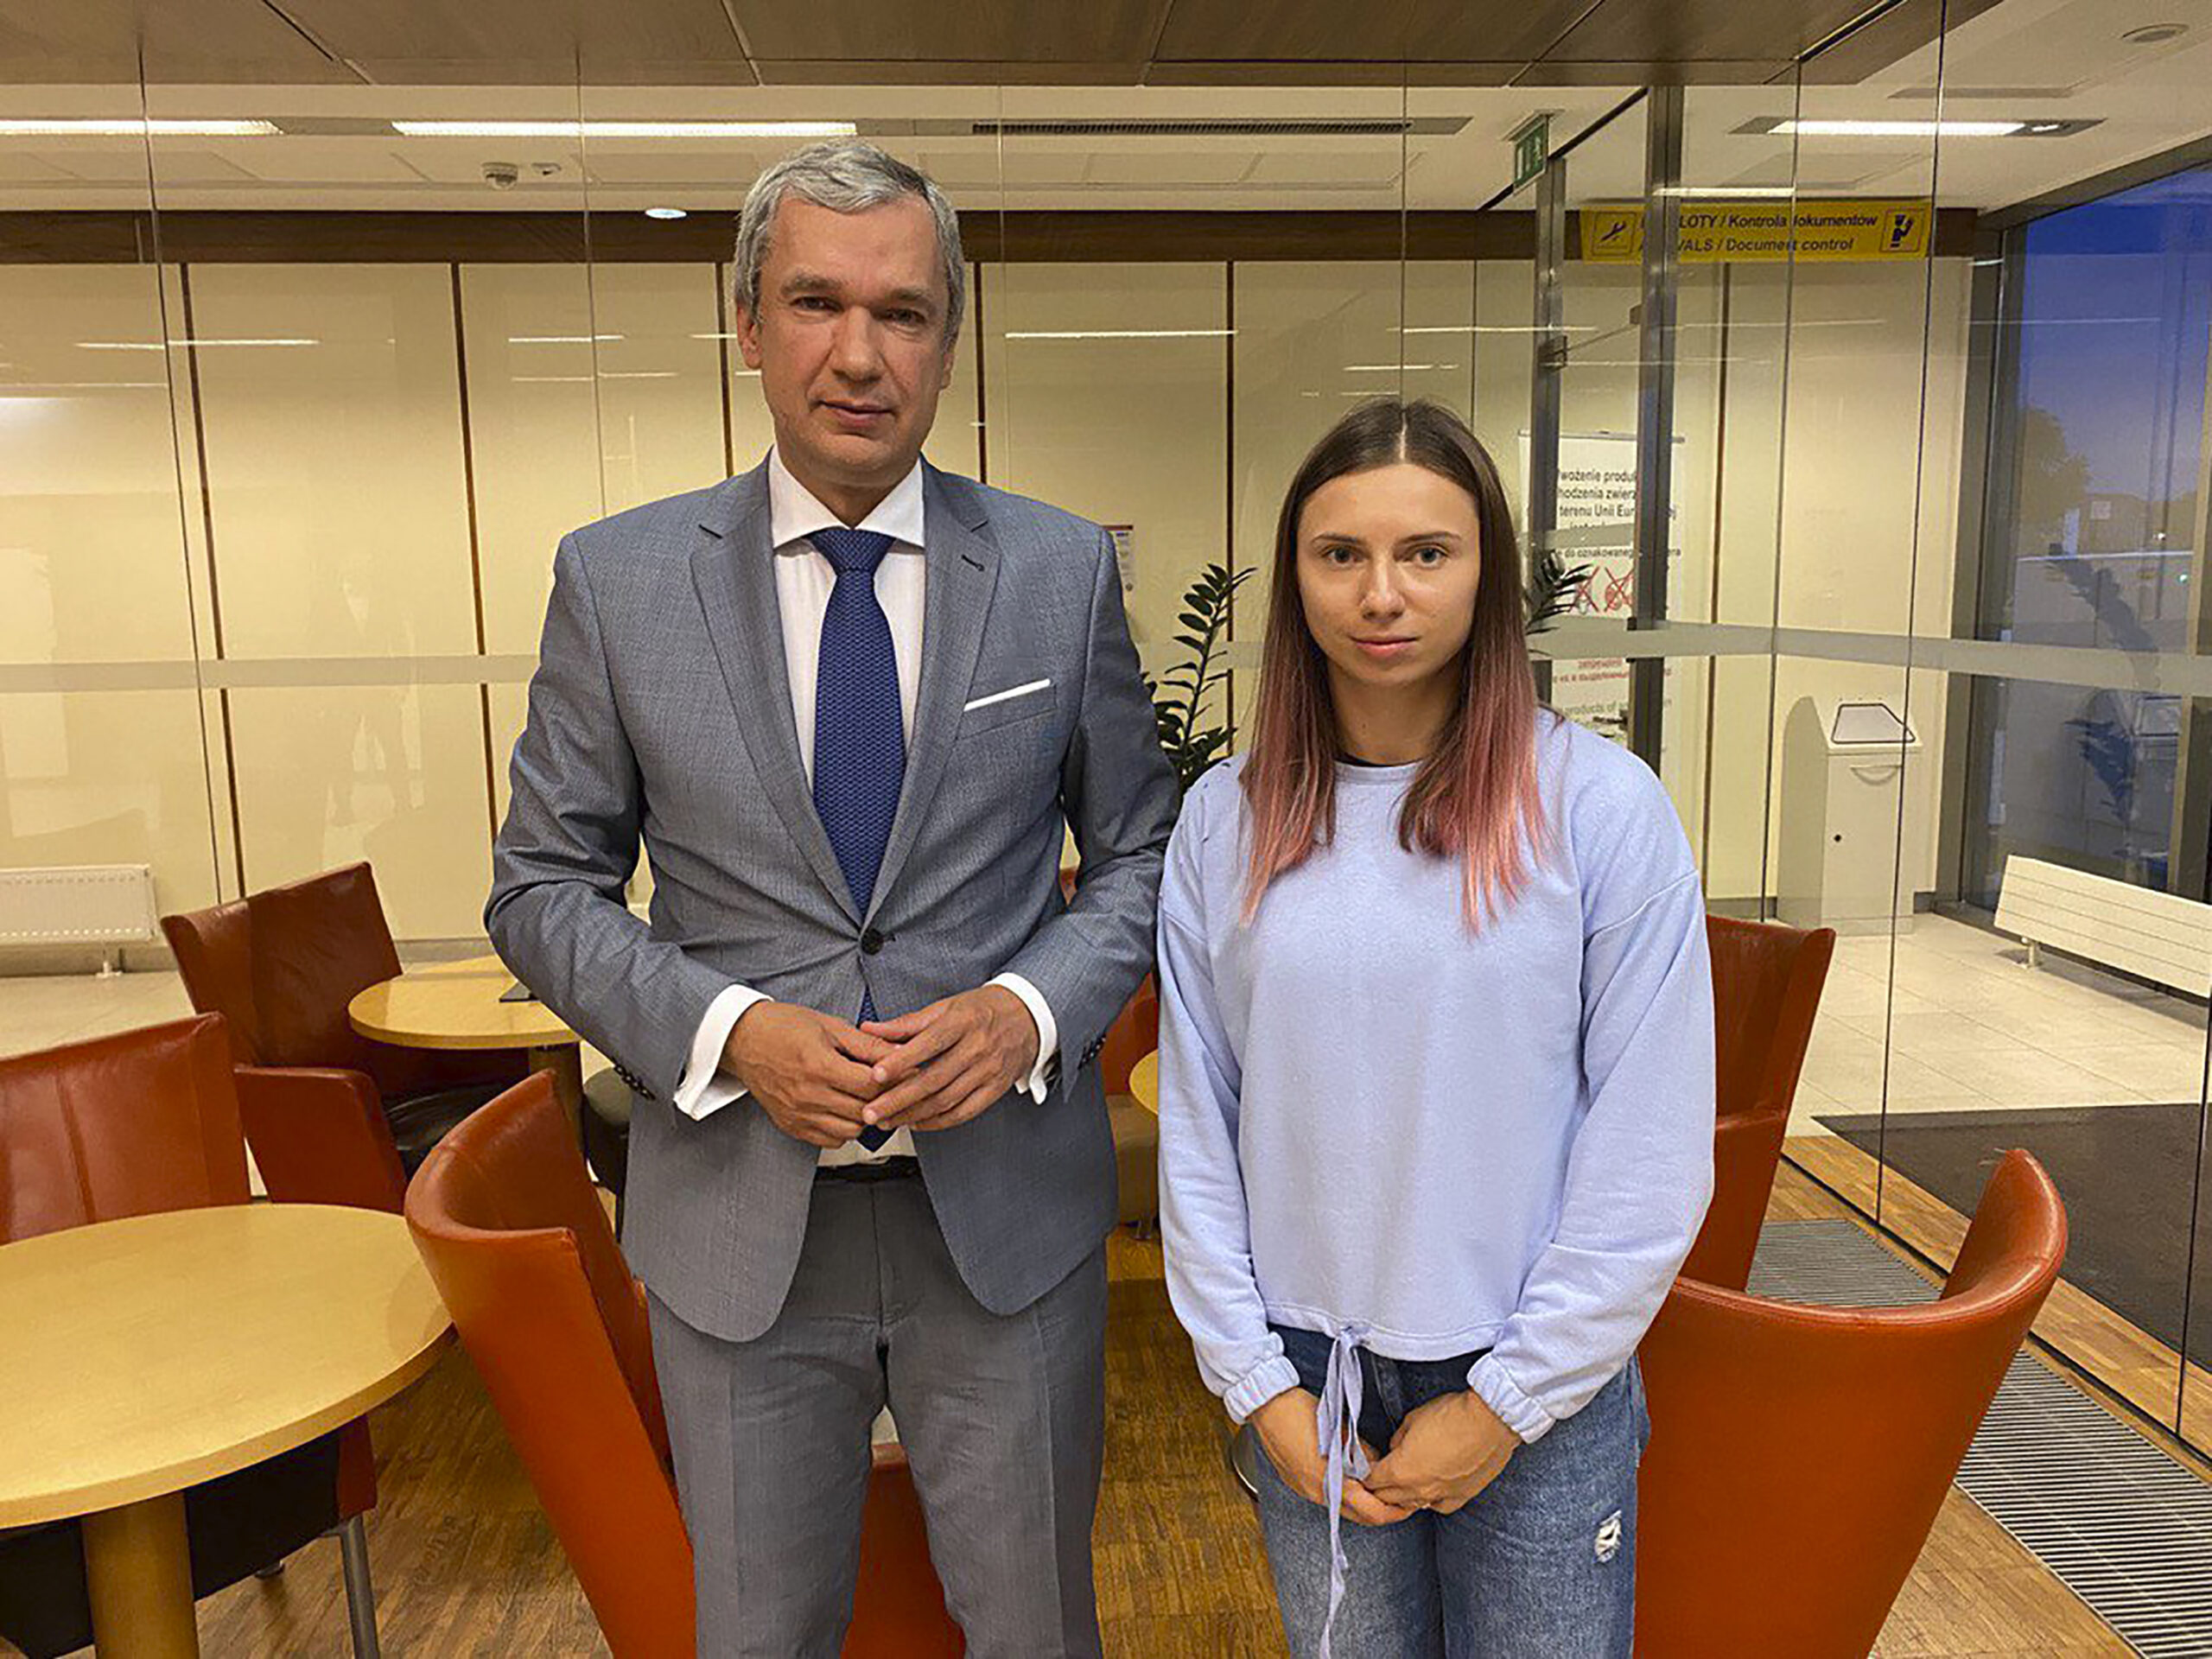 In this image taken on Wednesday Aug. 4, 2021 and provided by the National Anti-crisis Management, Belarusian Olympic sprinter Krystsina Tsimanouskaya, right, who seeks foreign refuge from Minsk authorities, poses for a photo with top Belarusian dissident in Poland, Pavel Latushko, left, shortly after her arrival at the Frederic Chopin Airport in Warsaw, Poland. Fearing for her safety at home after criticizing her coaches on social media, Tsimanouskaya flew from Tokyo to Warsaw with a stopover in Vienna. Poland has offered her and her husband humanitarian visas. (National Anti-crisis Management via AP)